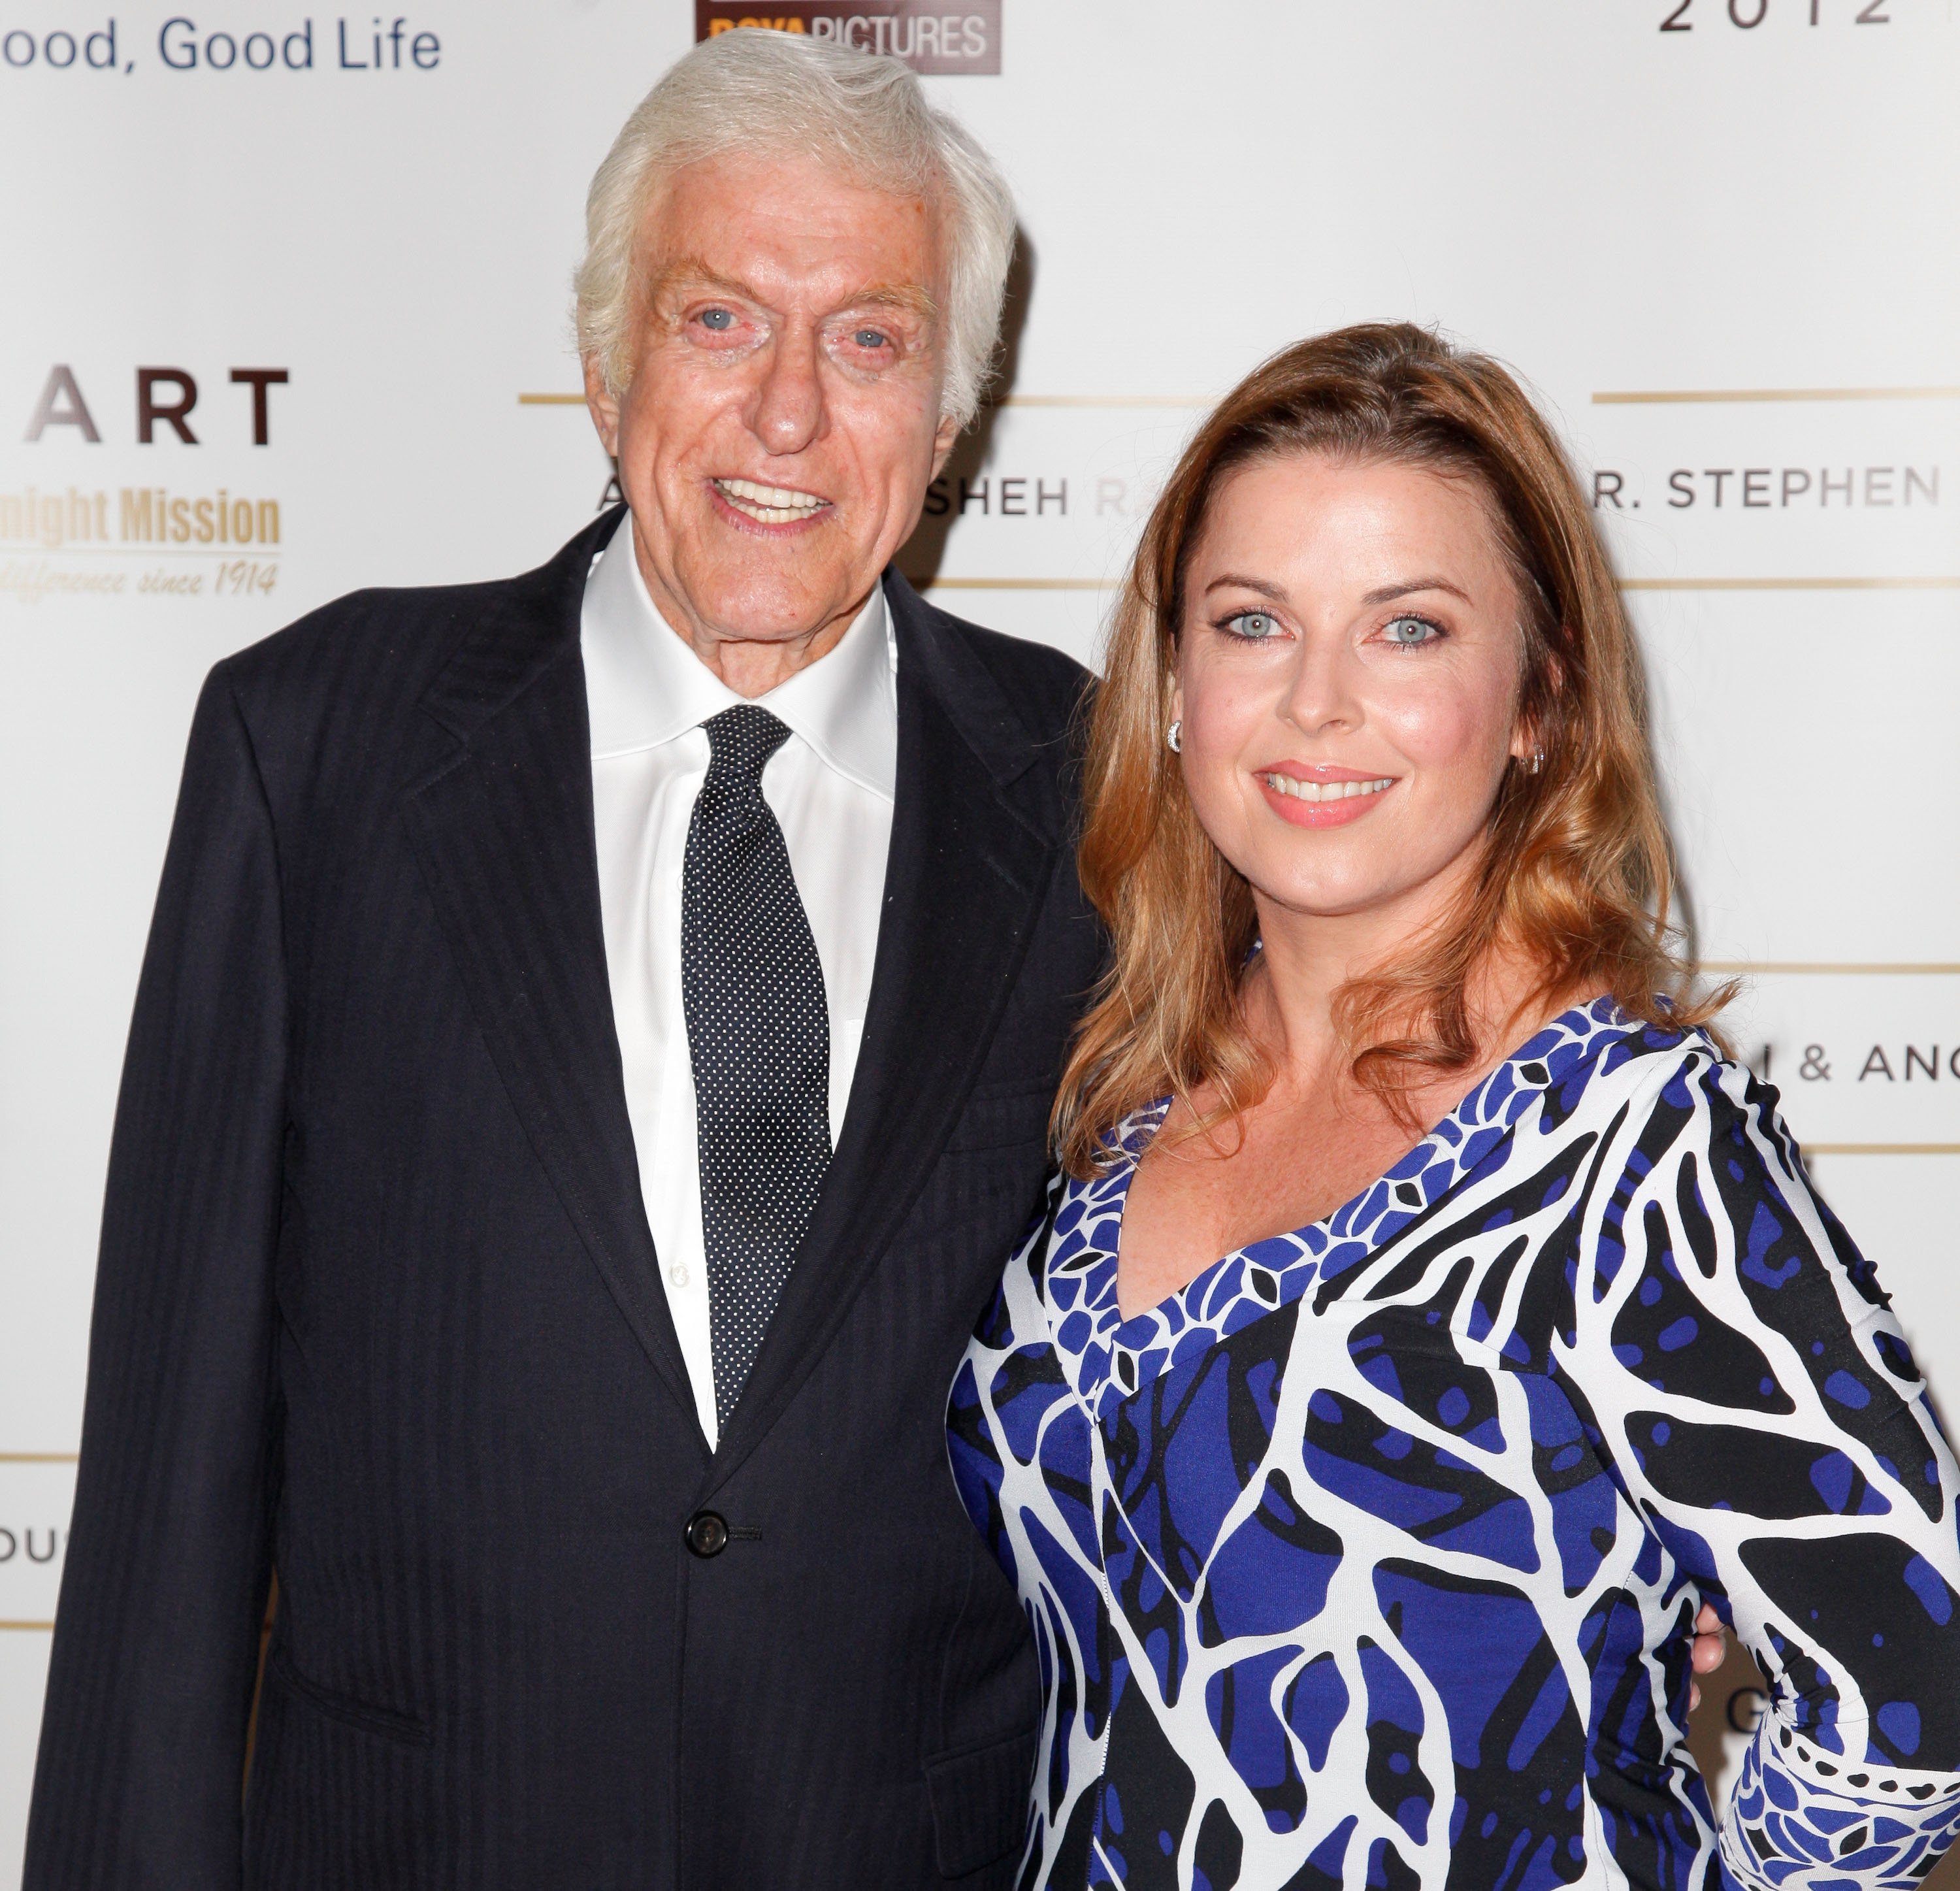 Dick Van Dyke and wife Arlene Silver attend the 12th Annual Golden Heart Awards Gala at the Beverly Wilshire Four Seasons Hotel on May 7, 2012, in Beverly Hills, California. | Source: Getty Images